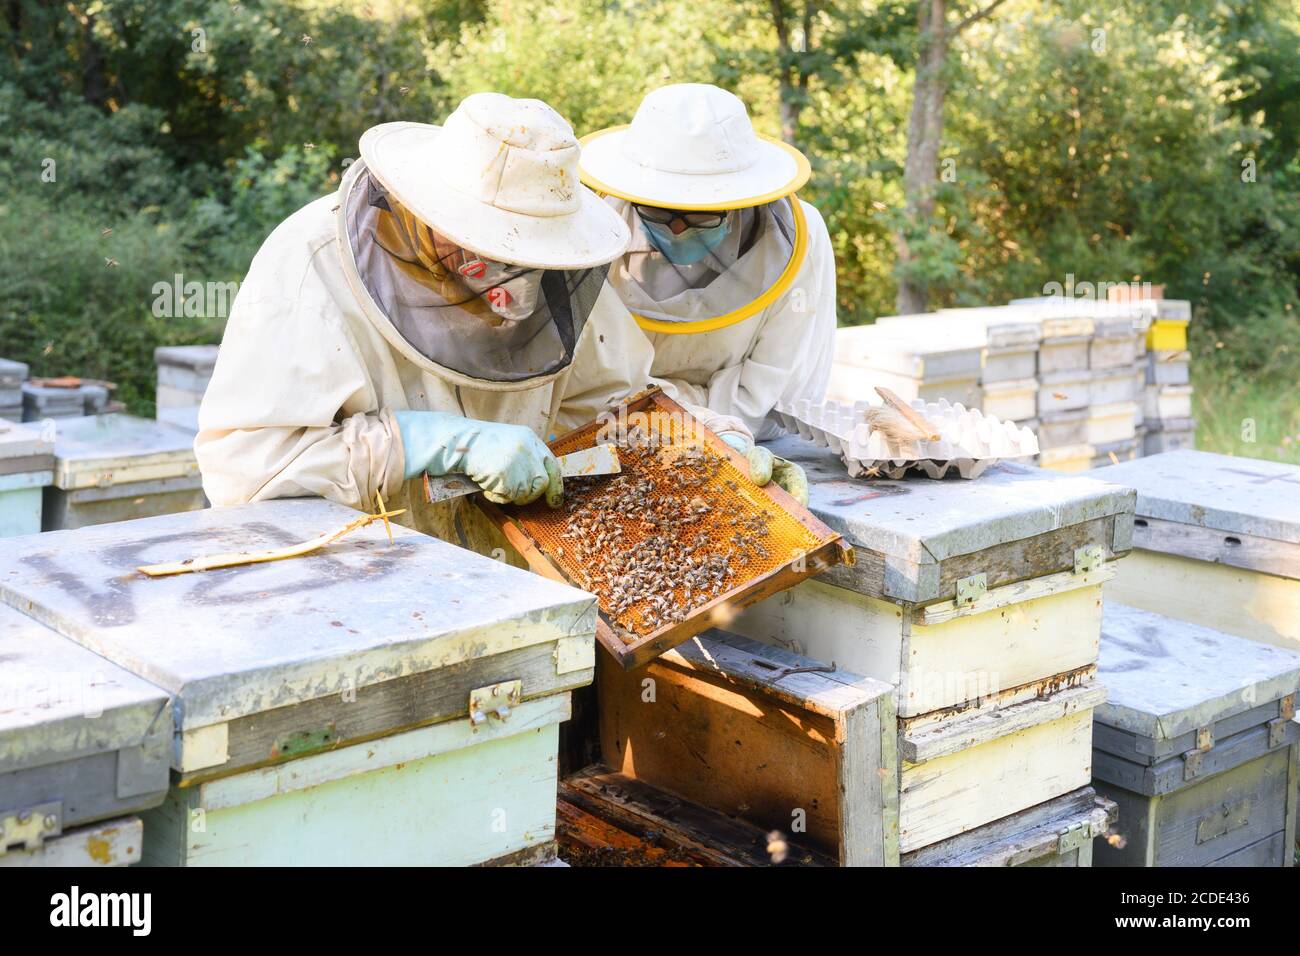 Beekeeper on apiary. Beekeeper is working with bees and beehives on the apiary. High quality image Stock Photo